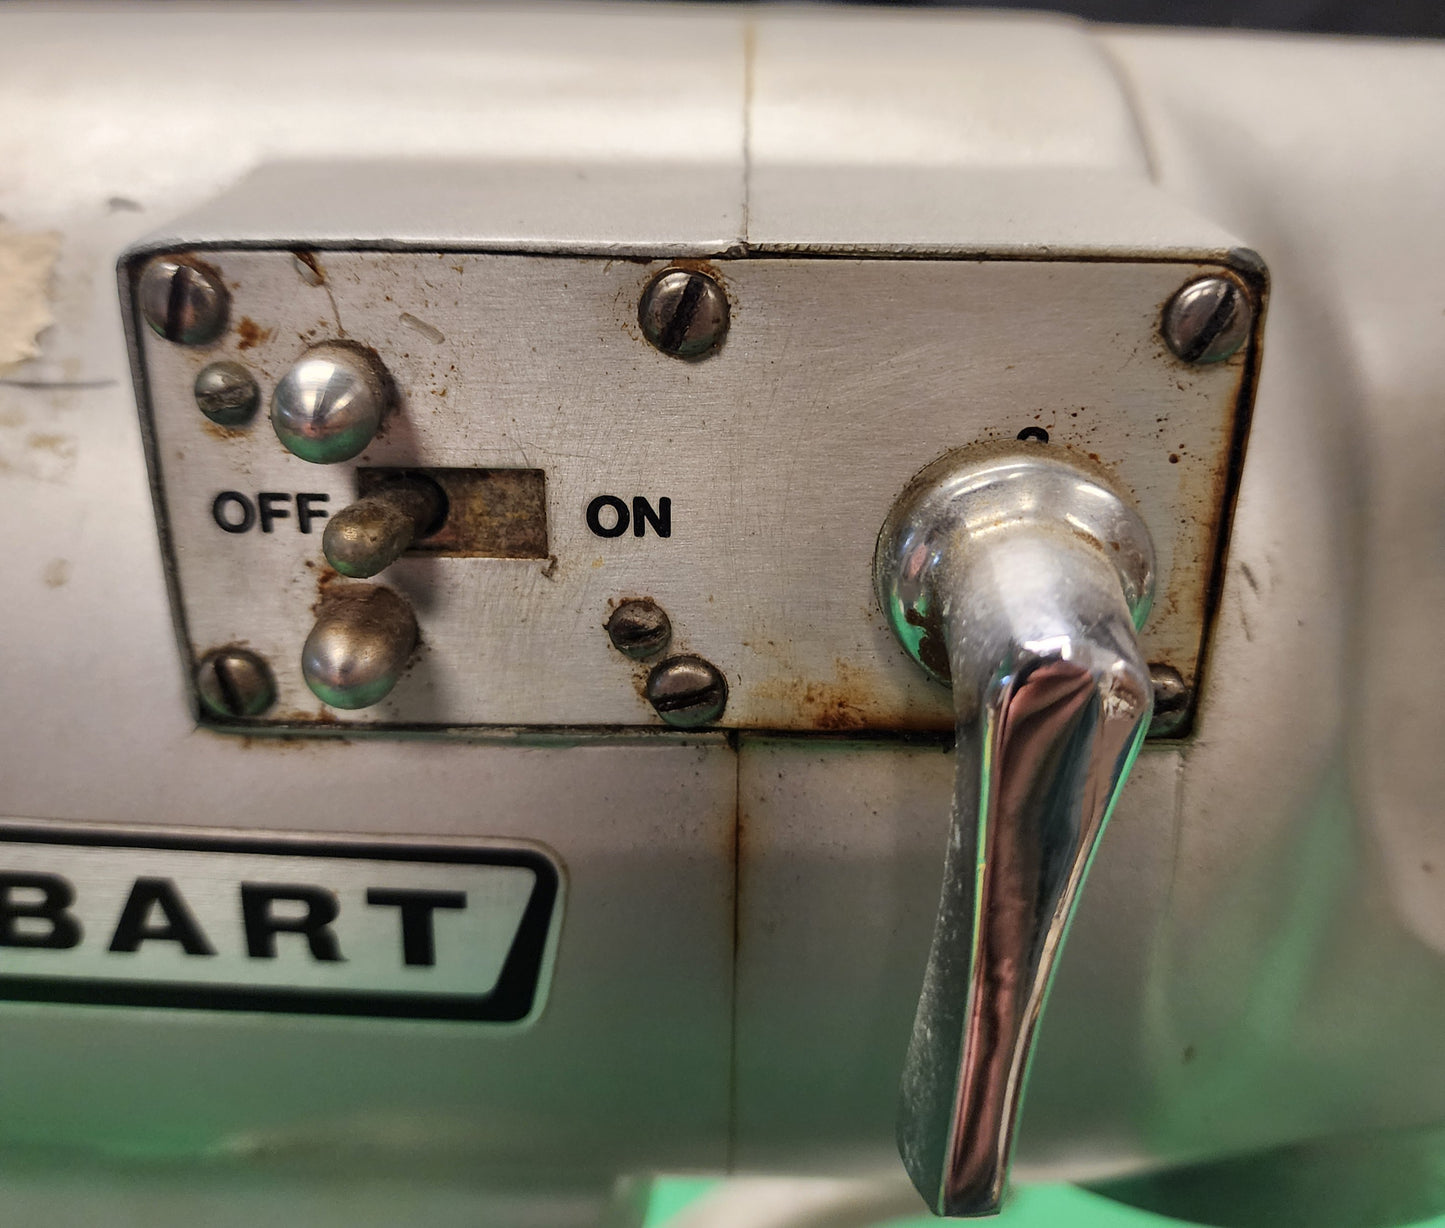 Vintage Hobart Mixer Model N-50: Durable Performance with Character